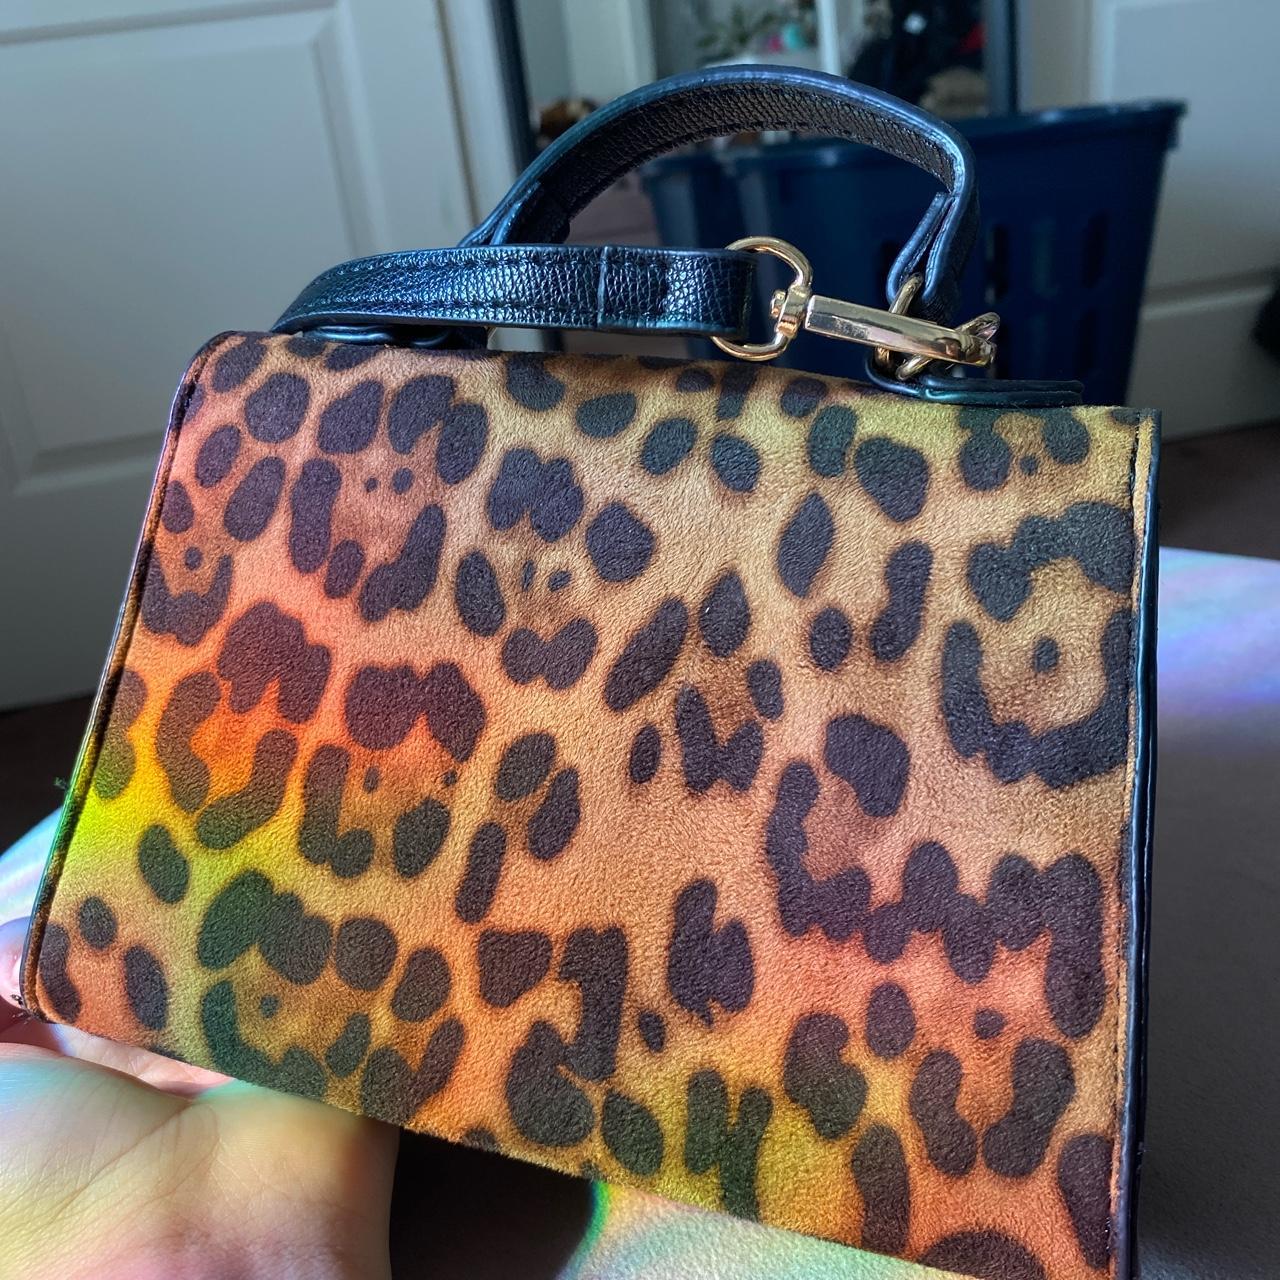 Dark colored cheetah bag made by me! - comes in 3 - Depop